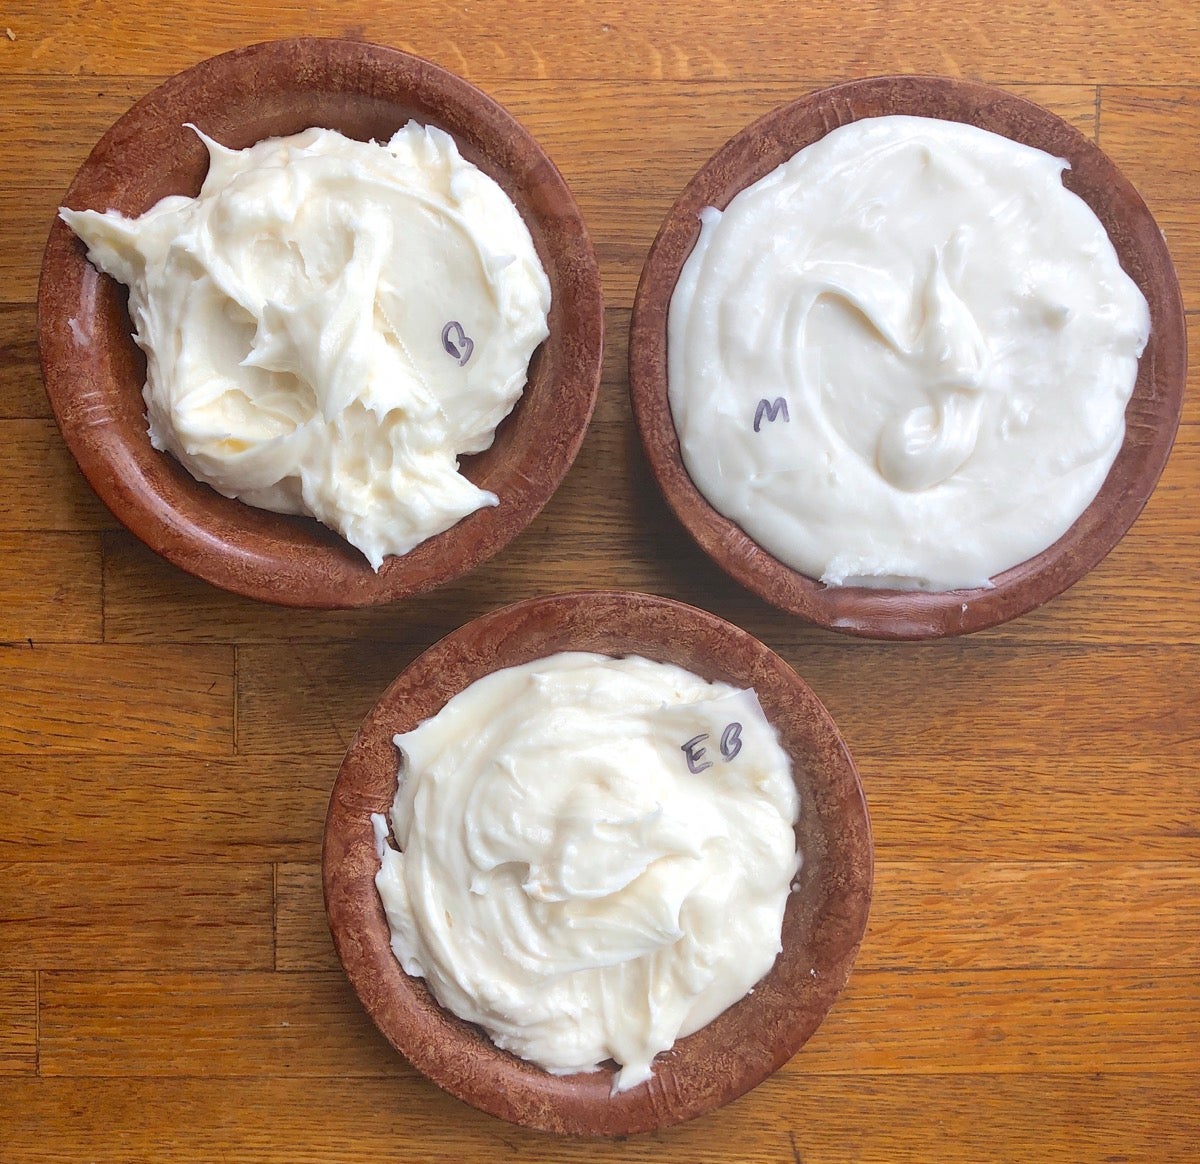 Buttercream frosting in three small bowls, each made with a different type of butter to show differences in color and texture.